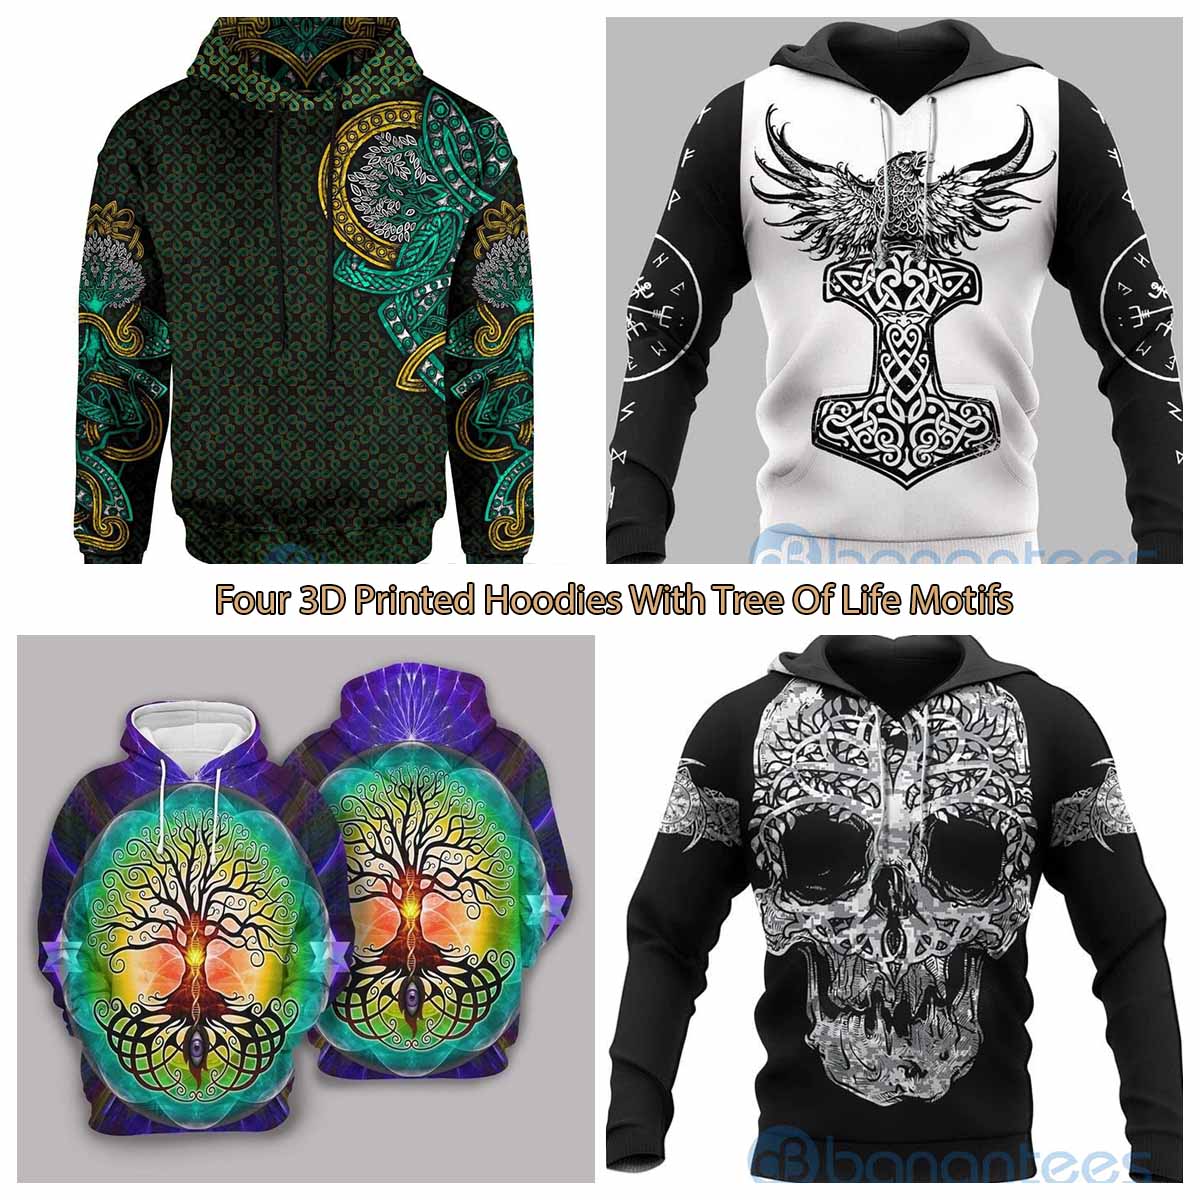 Four 3D Printed Hoodies With Tree Of Life Motifs